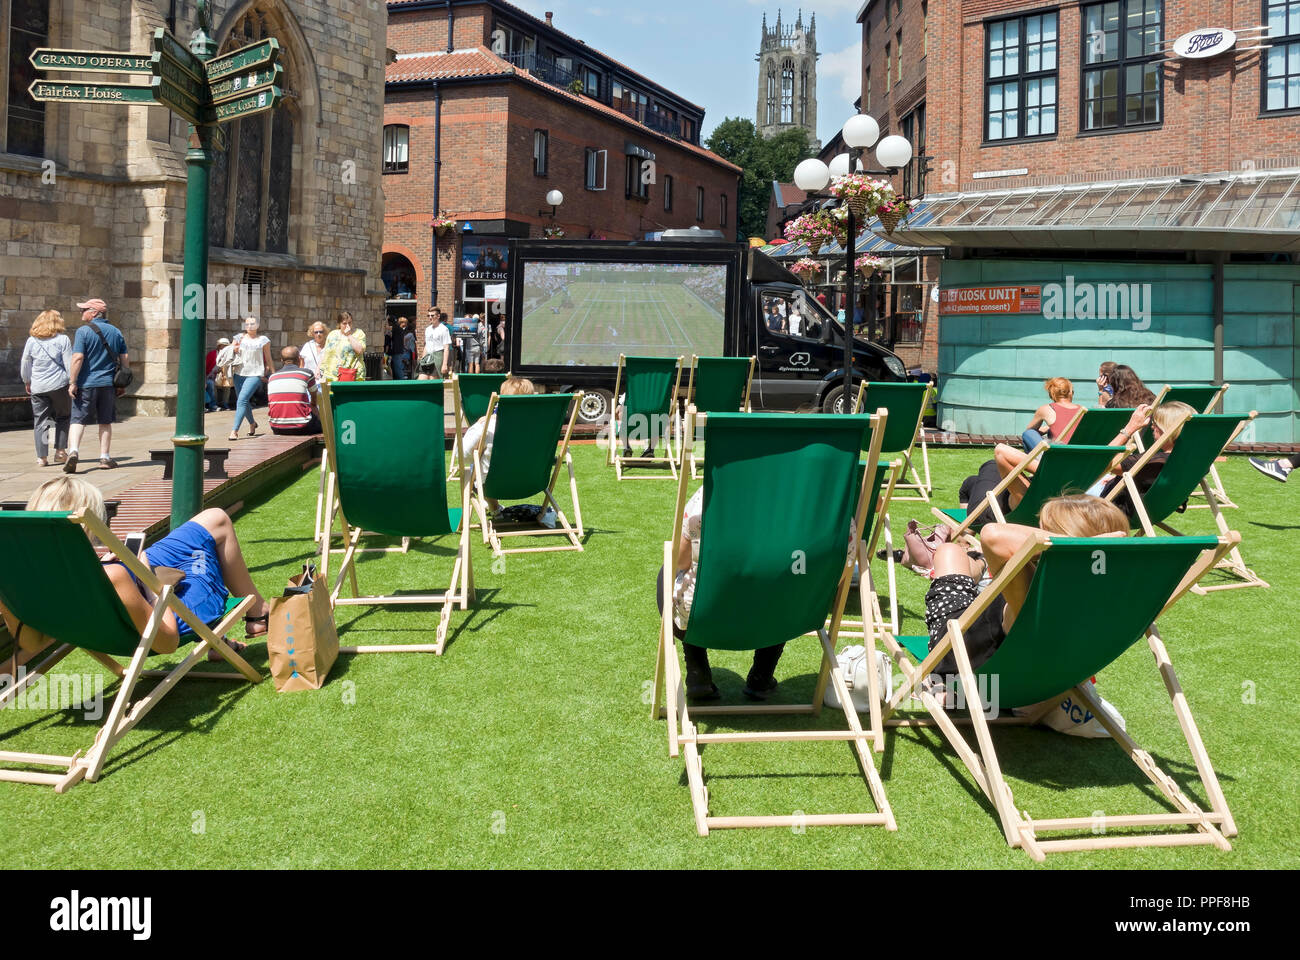 People watching tennis on large screen outside outdoors in summer Coppergate York North Yorkshire England UK United Kingdom GB Great Britain Stock Photo